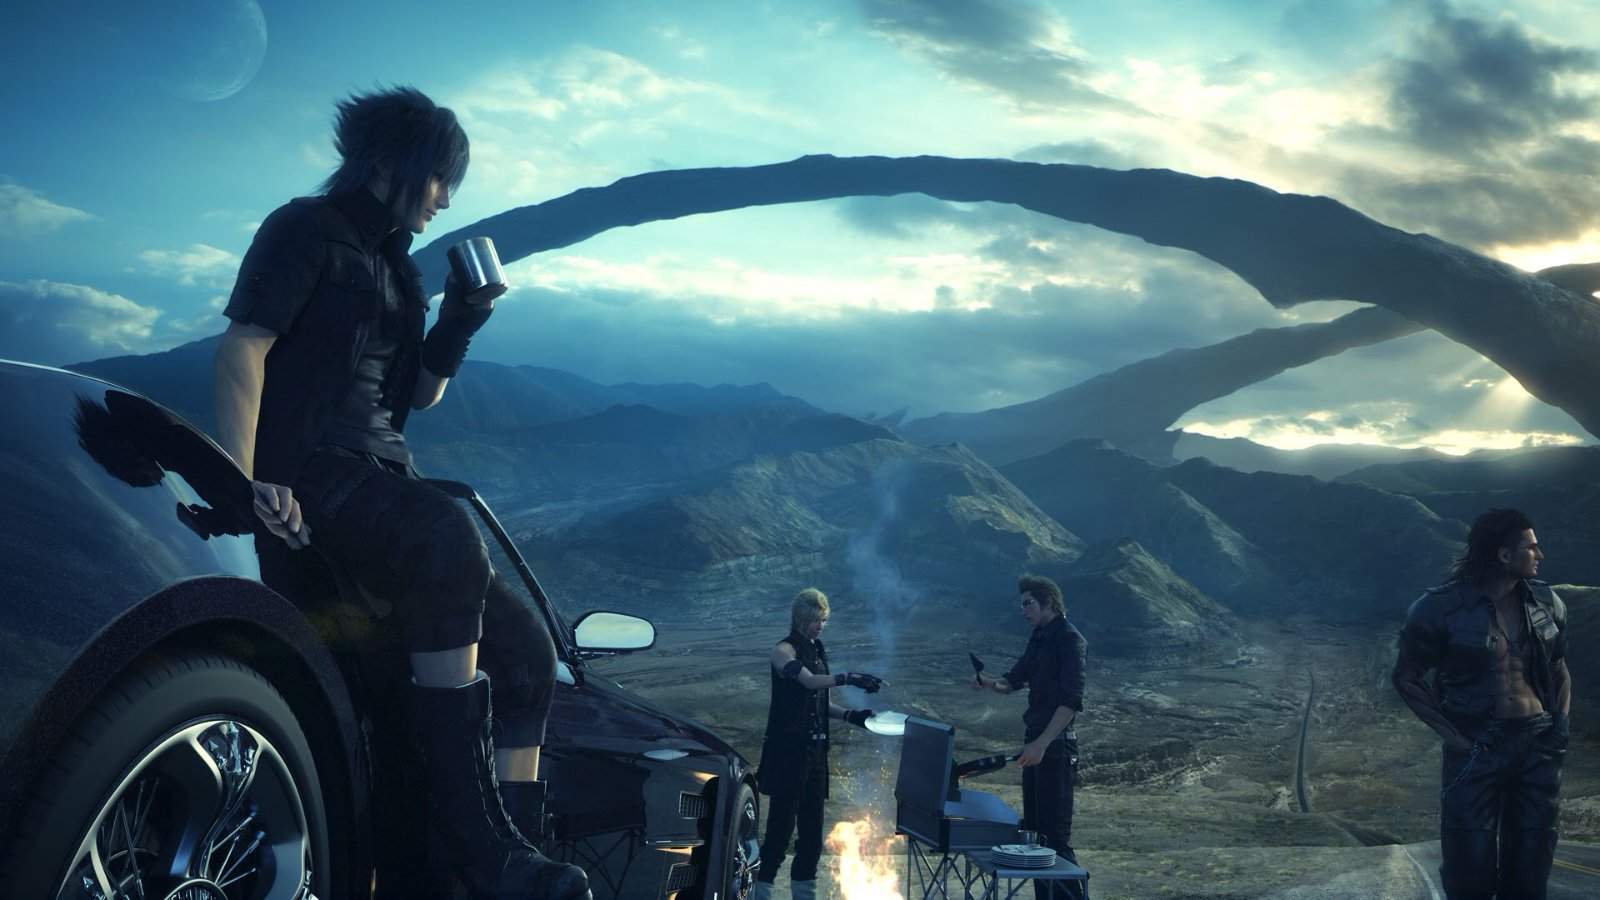 Vamers - FYI - Video Gaming - $270 Final Fantasy XV Ultimate Collector's Edition does not include a Season Pass - 03